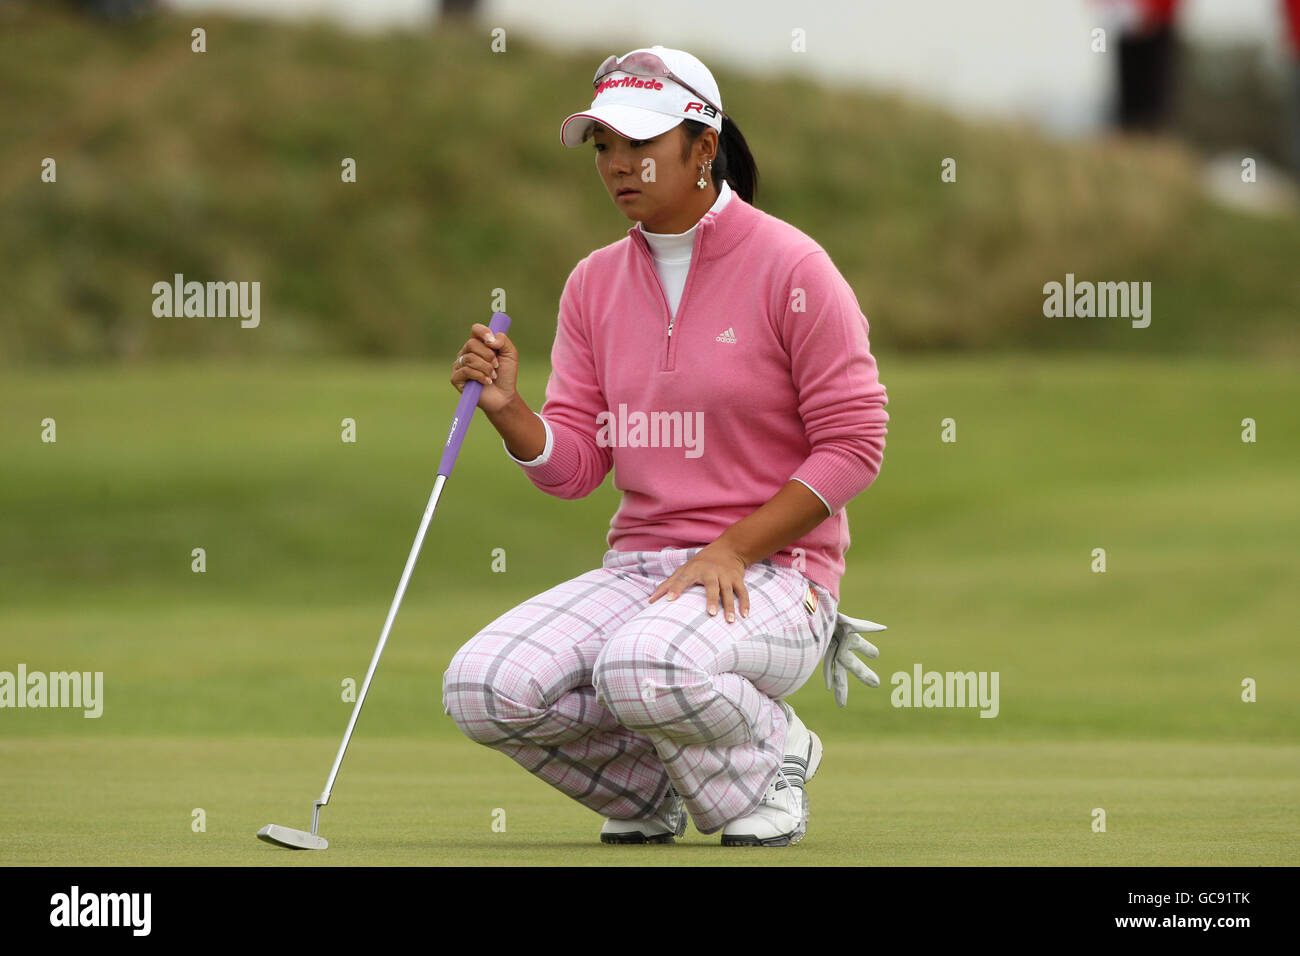 Golf - Ricoh Women's British Open - Day Two - Royal Lytham and St Anne's Golf Course. Japan's Yuko Mitsuka lines up a putt Stock Photo